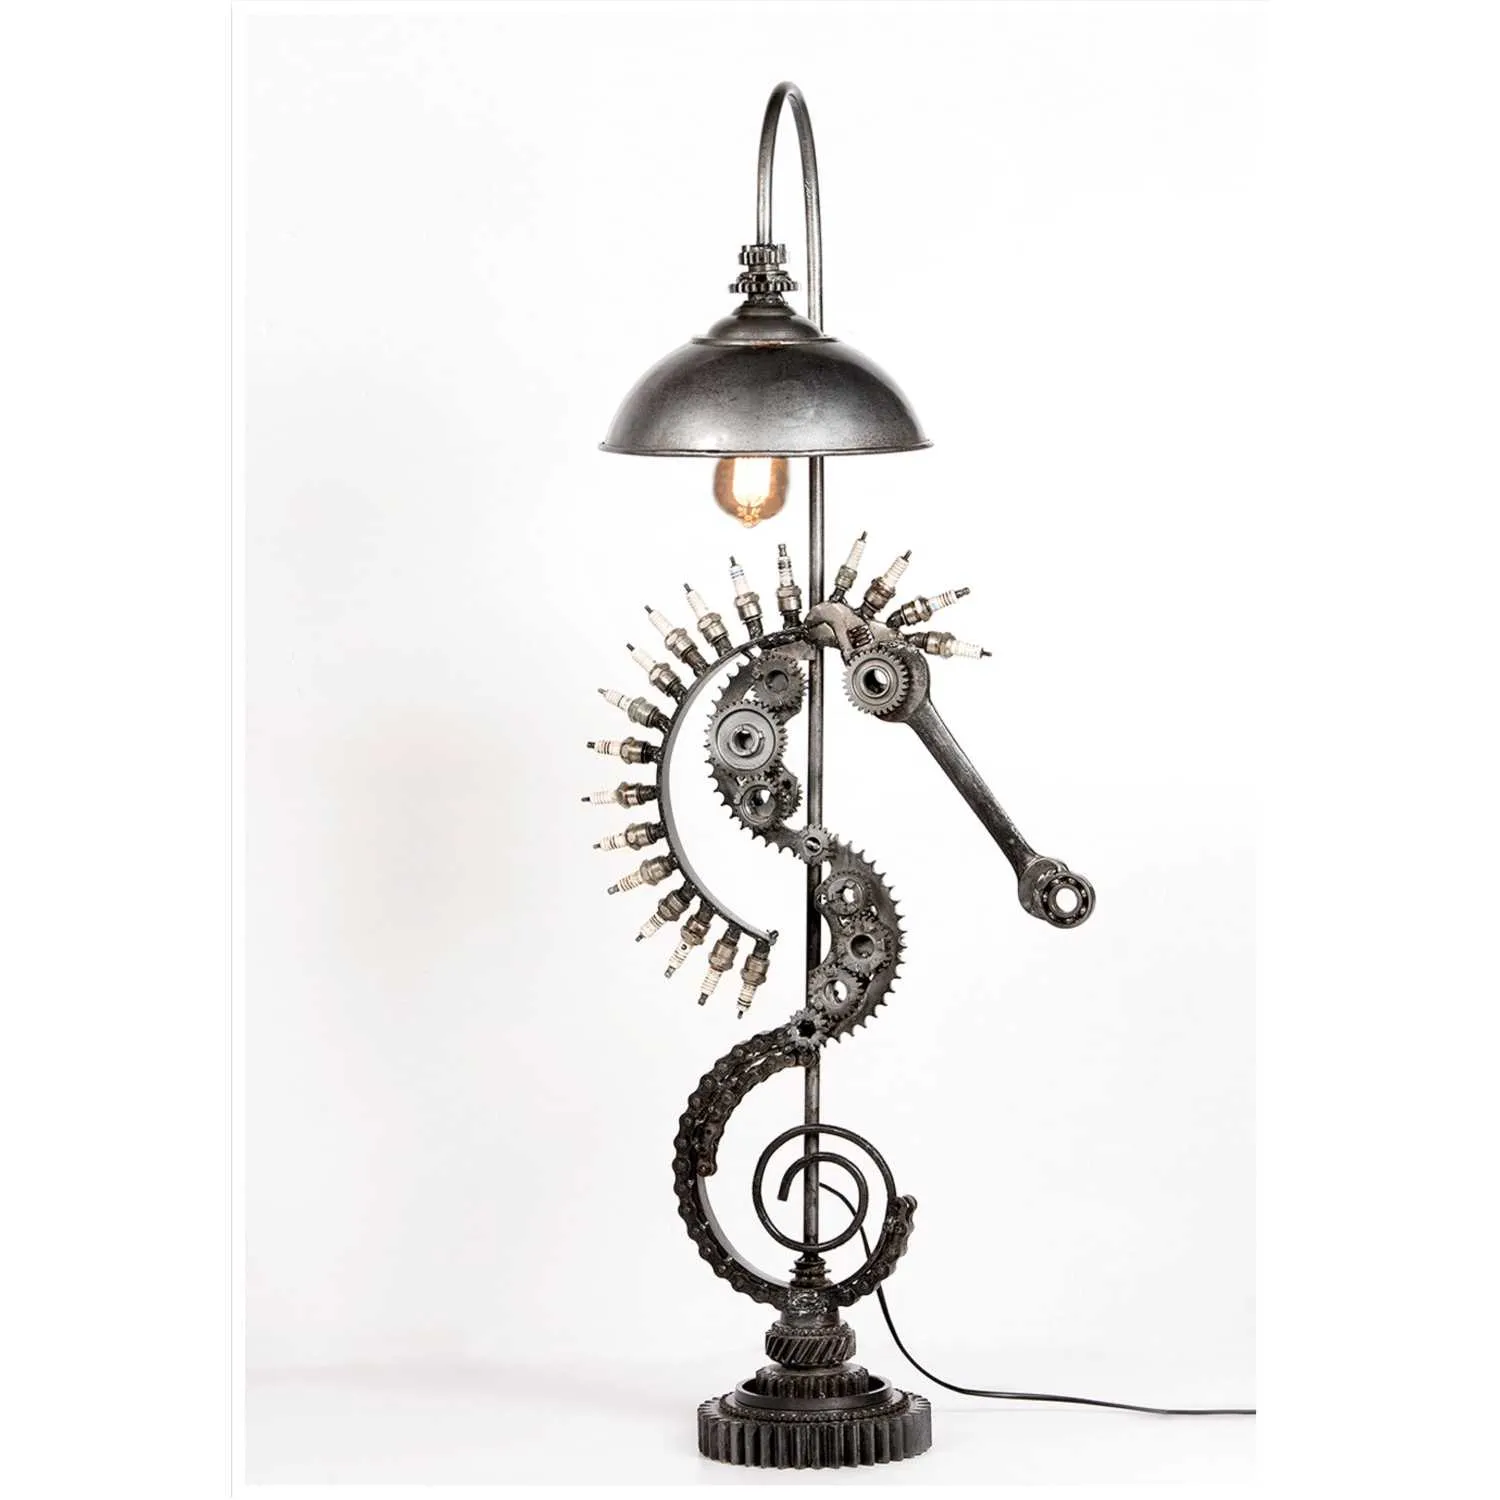 Upcycled Lighting And Furniture Art Deco Metal Steampunk Sea Horse Floor Lamp 112cm Tall